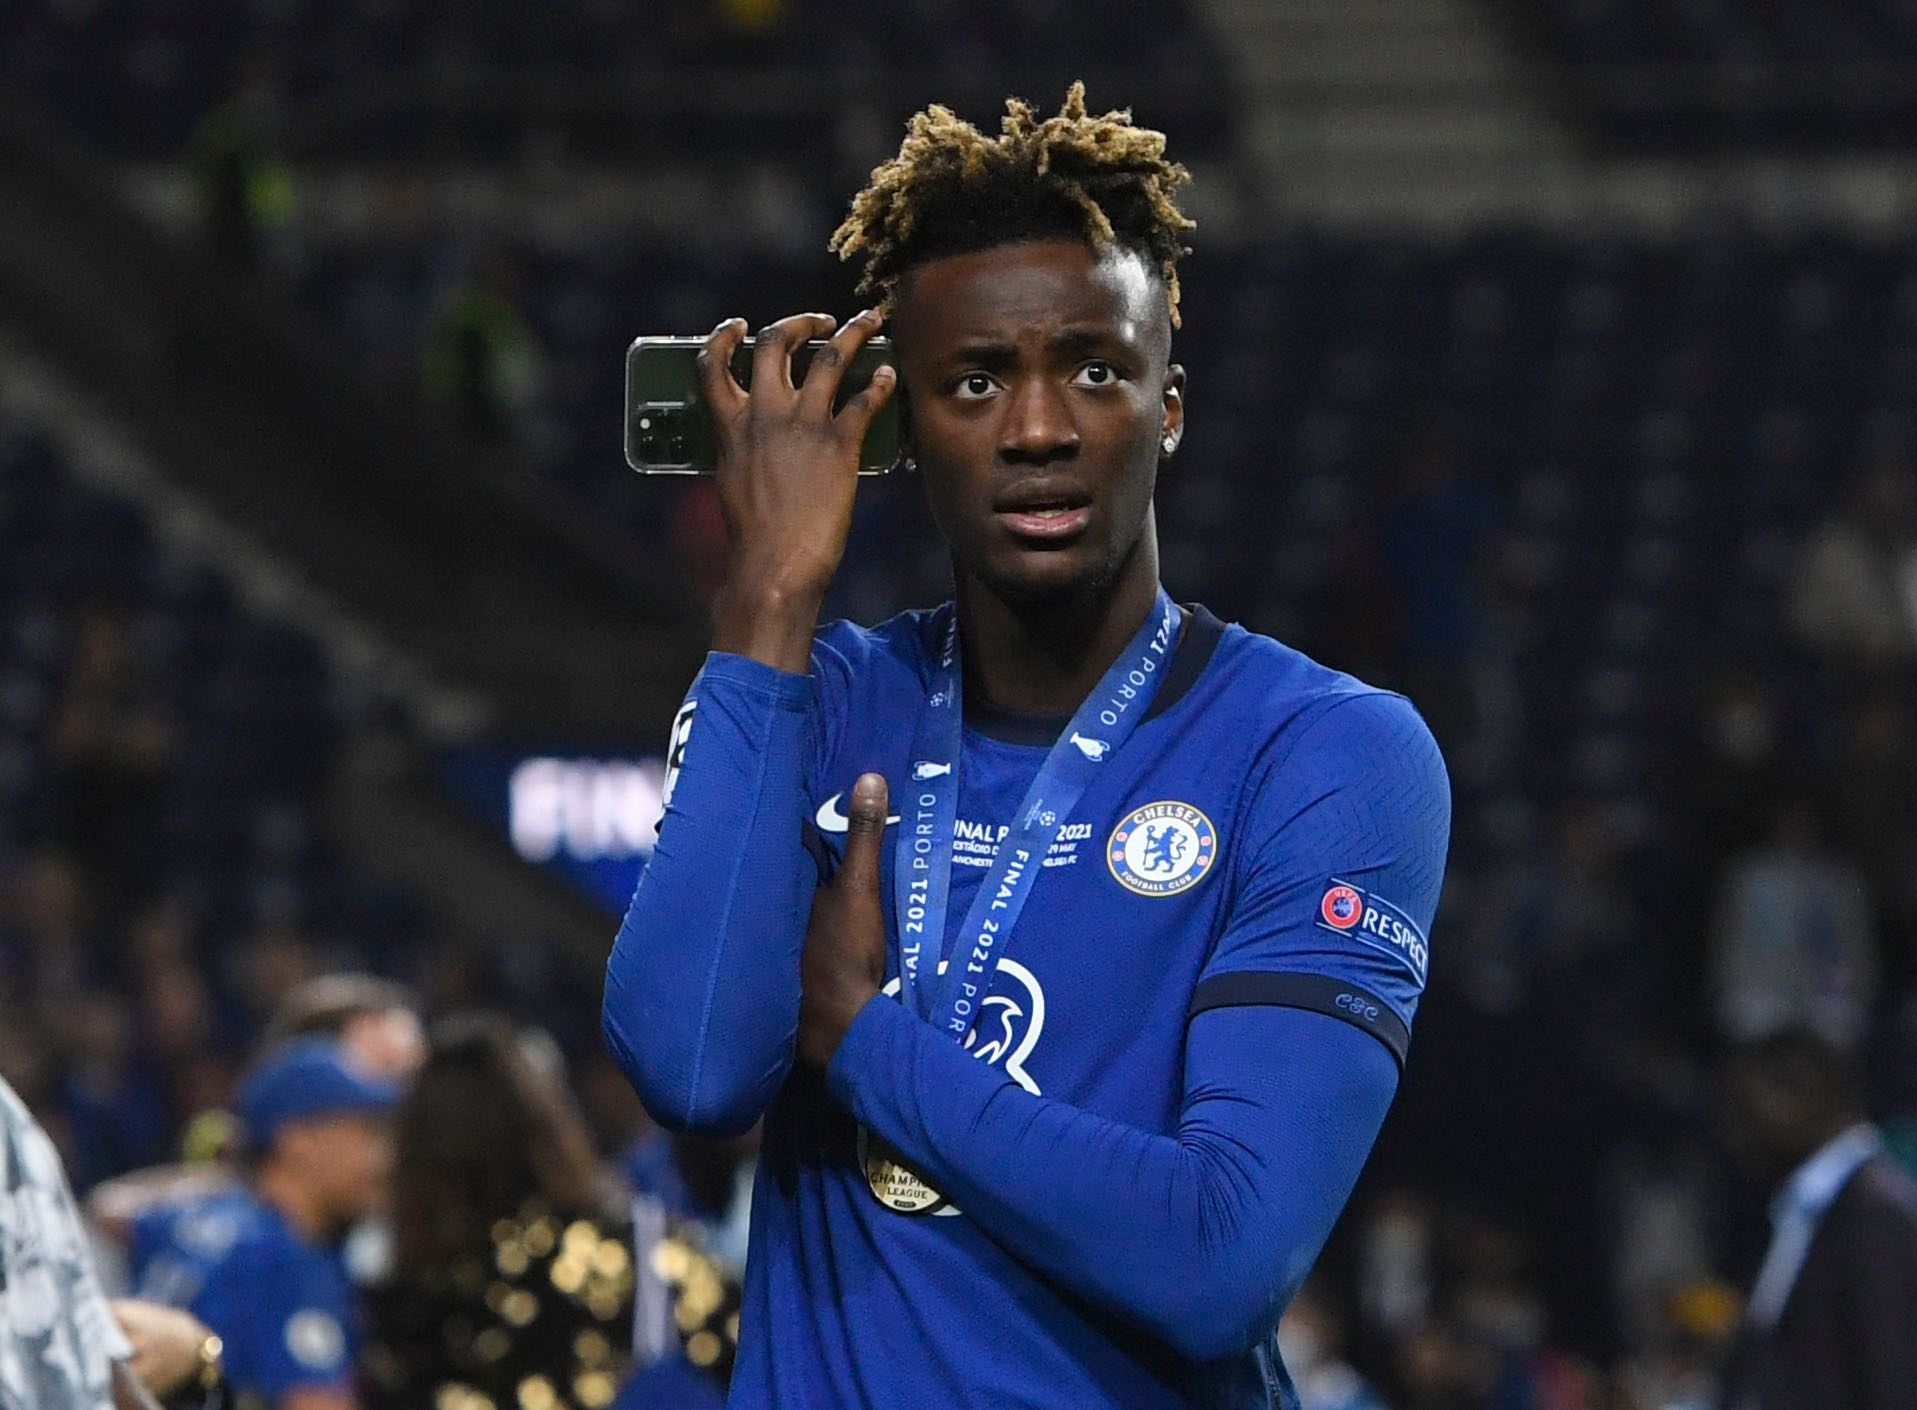 Soccer Football - Champions League Final - Manchester City v Chelsea - Estadio do Dragao, Porto, Portugal - May 29, 2021 Chelsea's Tammy Abraham talks on the phone after winning the Champions League Pool via REUTERS/Pierre-Philippe Marcou